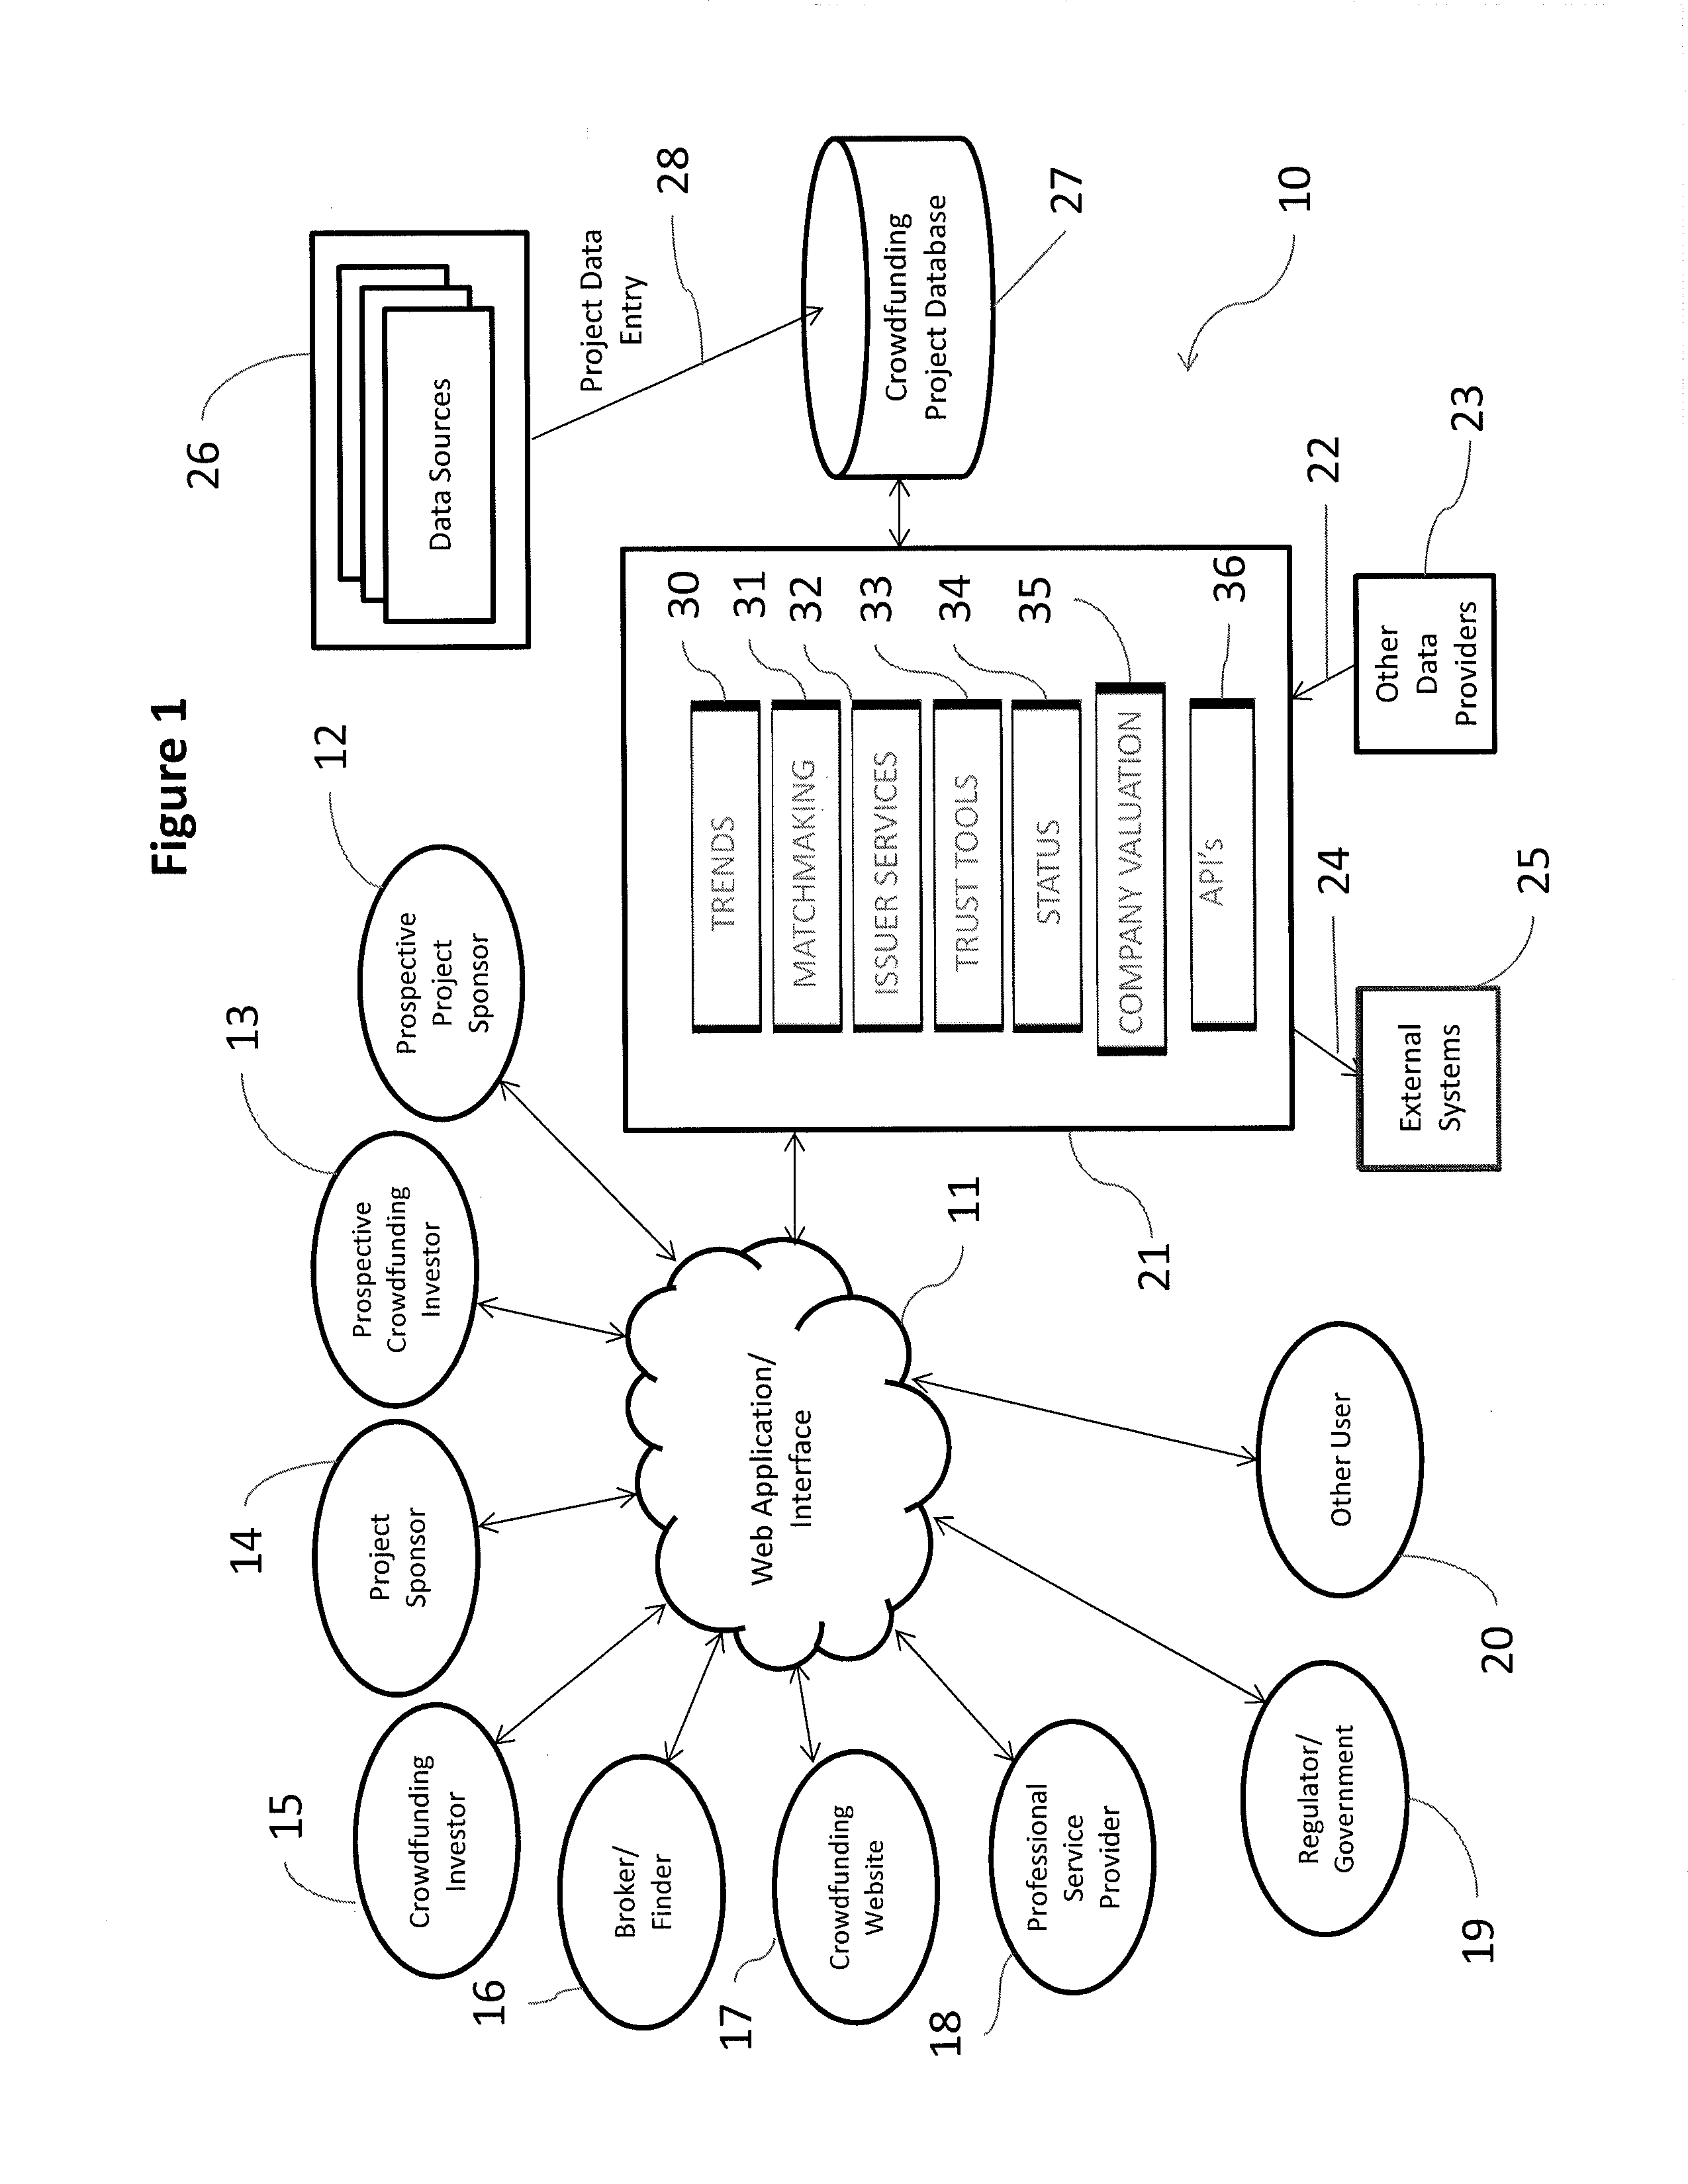 System and Method of Data Collection, Analysis and Distribution